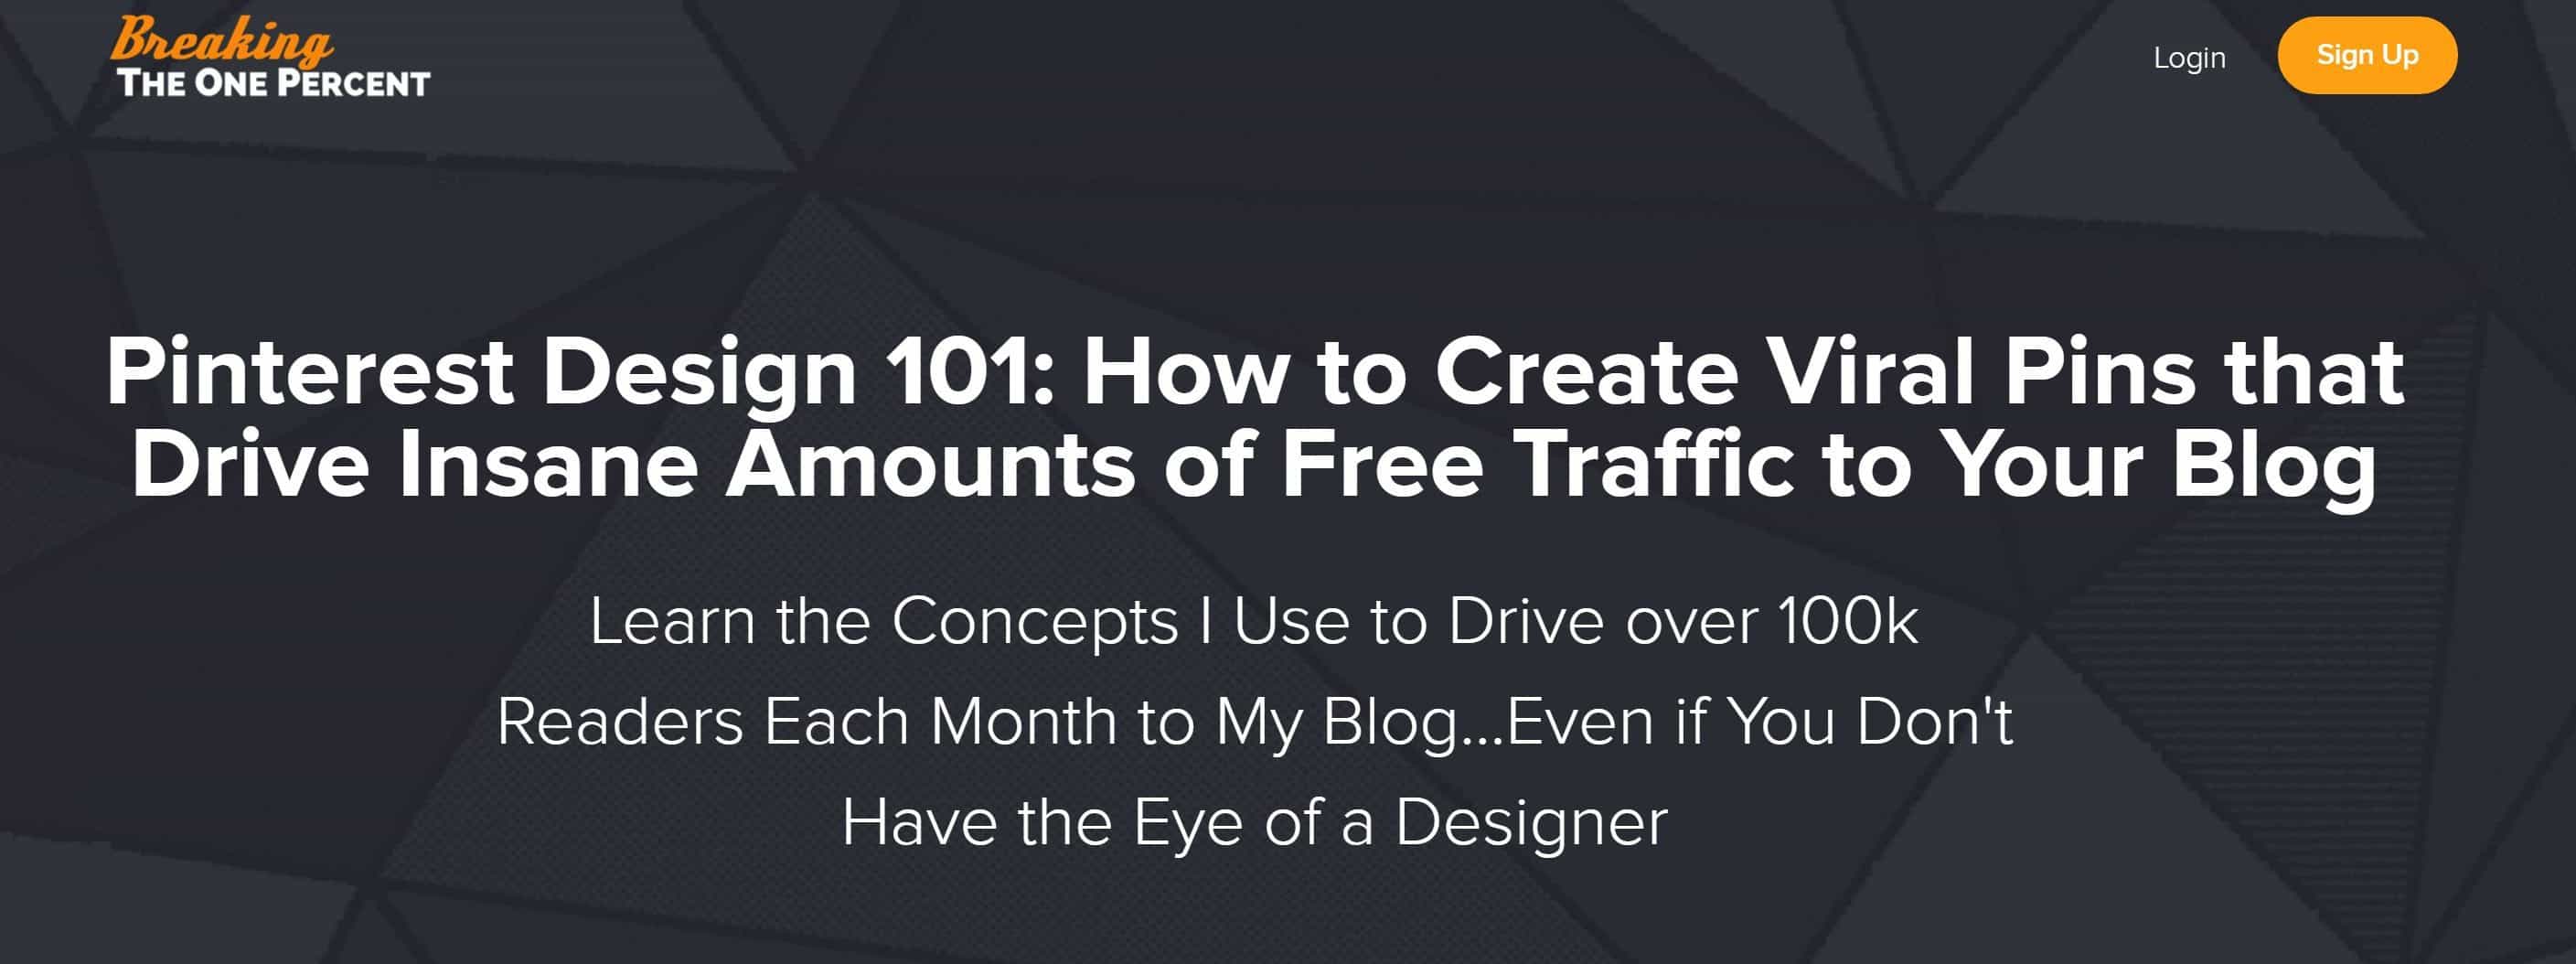 Pinterest Design Course: How to Create Viral Pins and Increase Your Blog Traffic